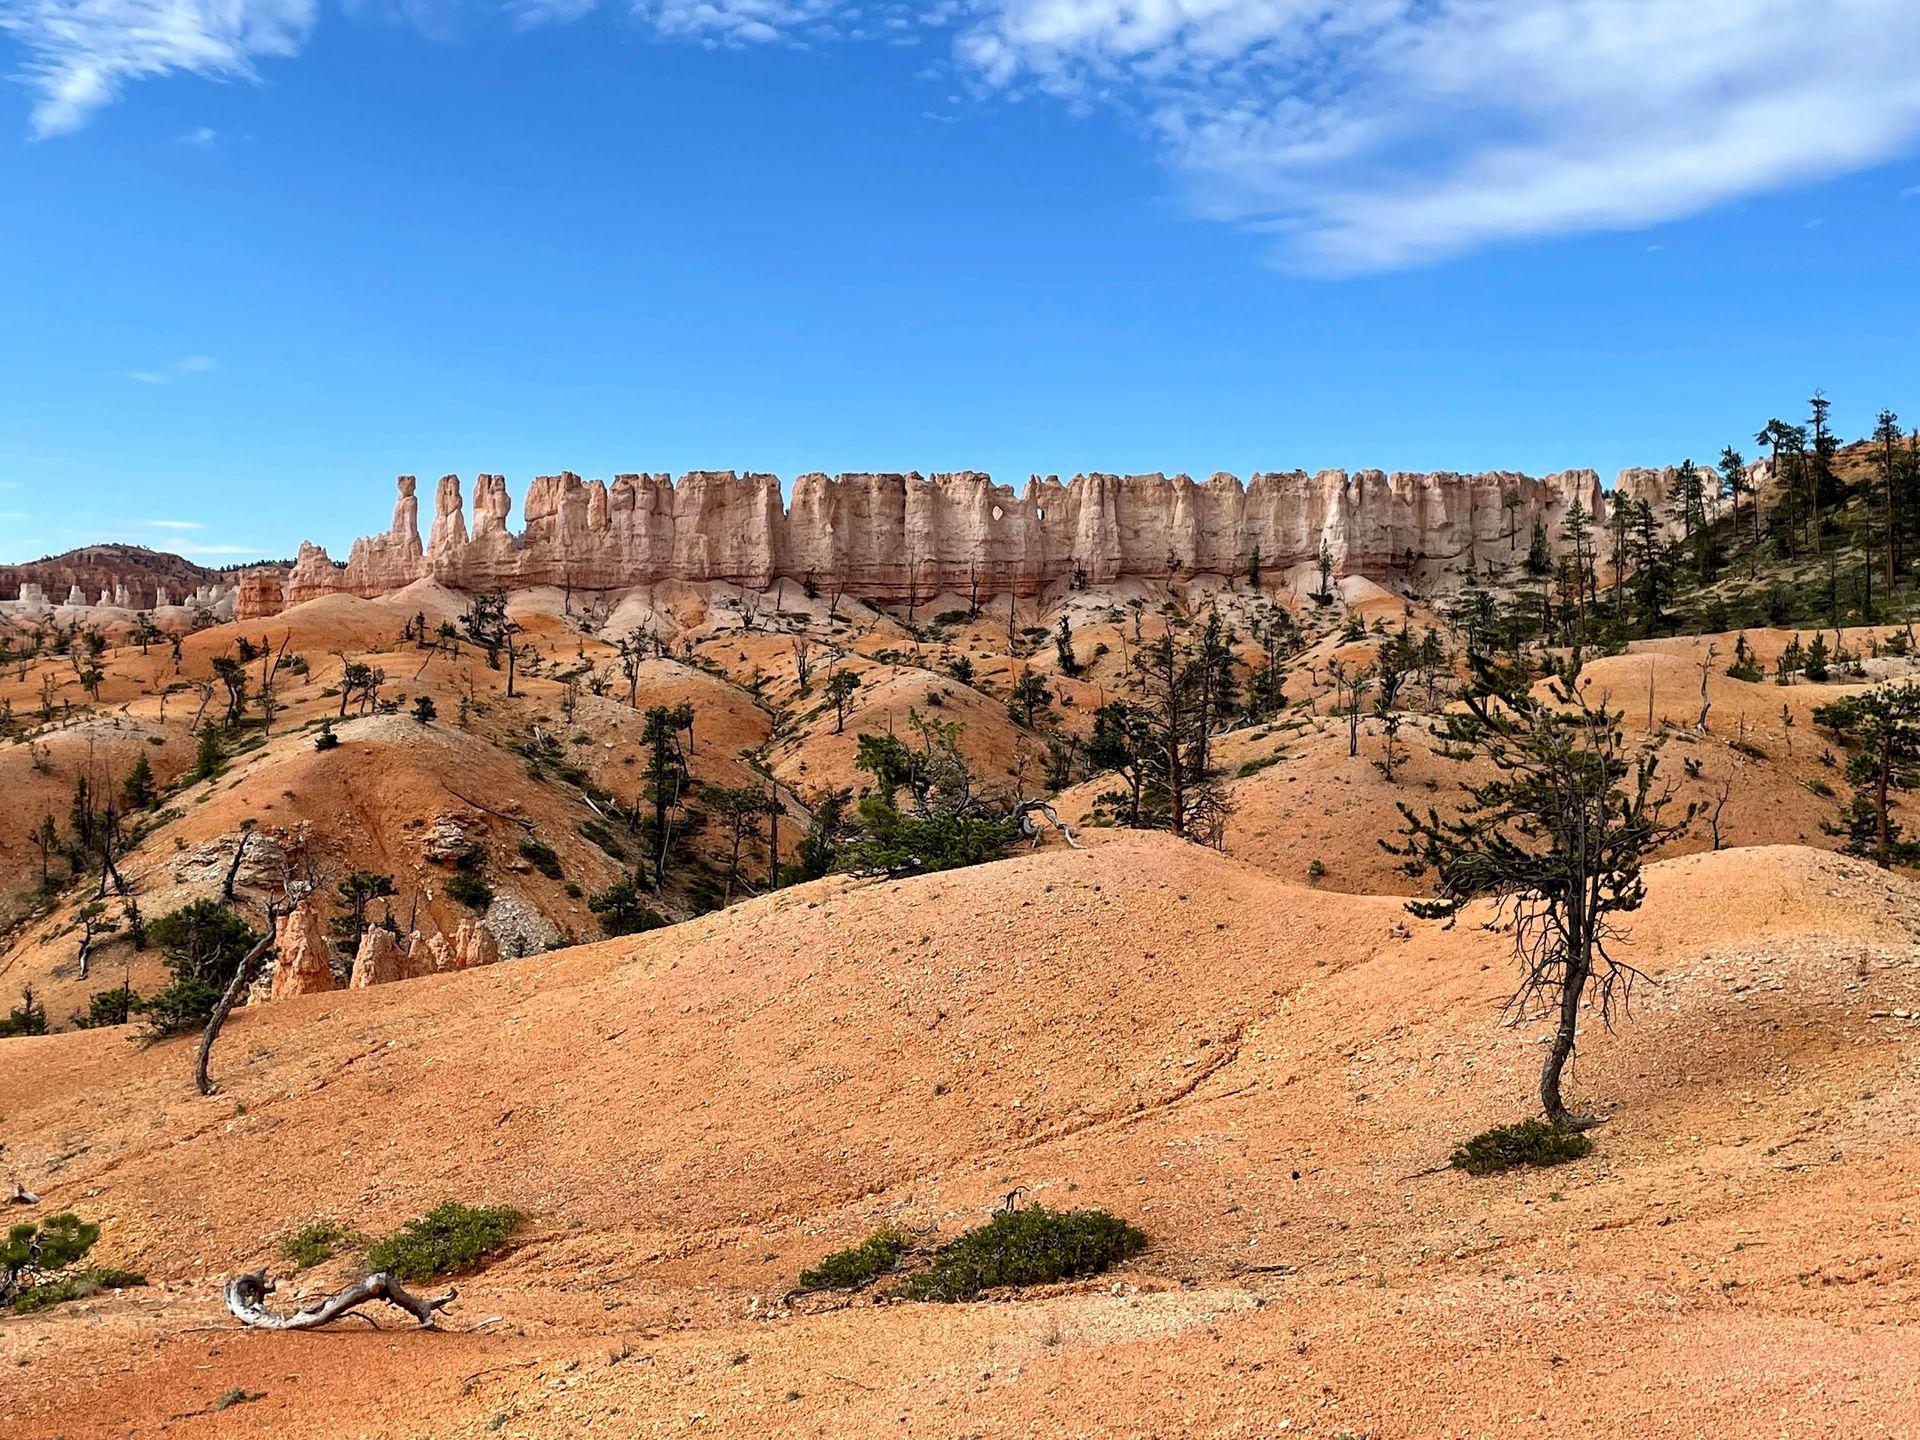 A view of a wall of hoodoos known as the "China Wall" from the Fairyland loop trail.